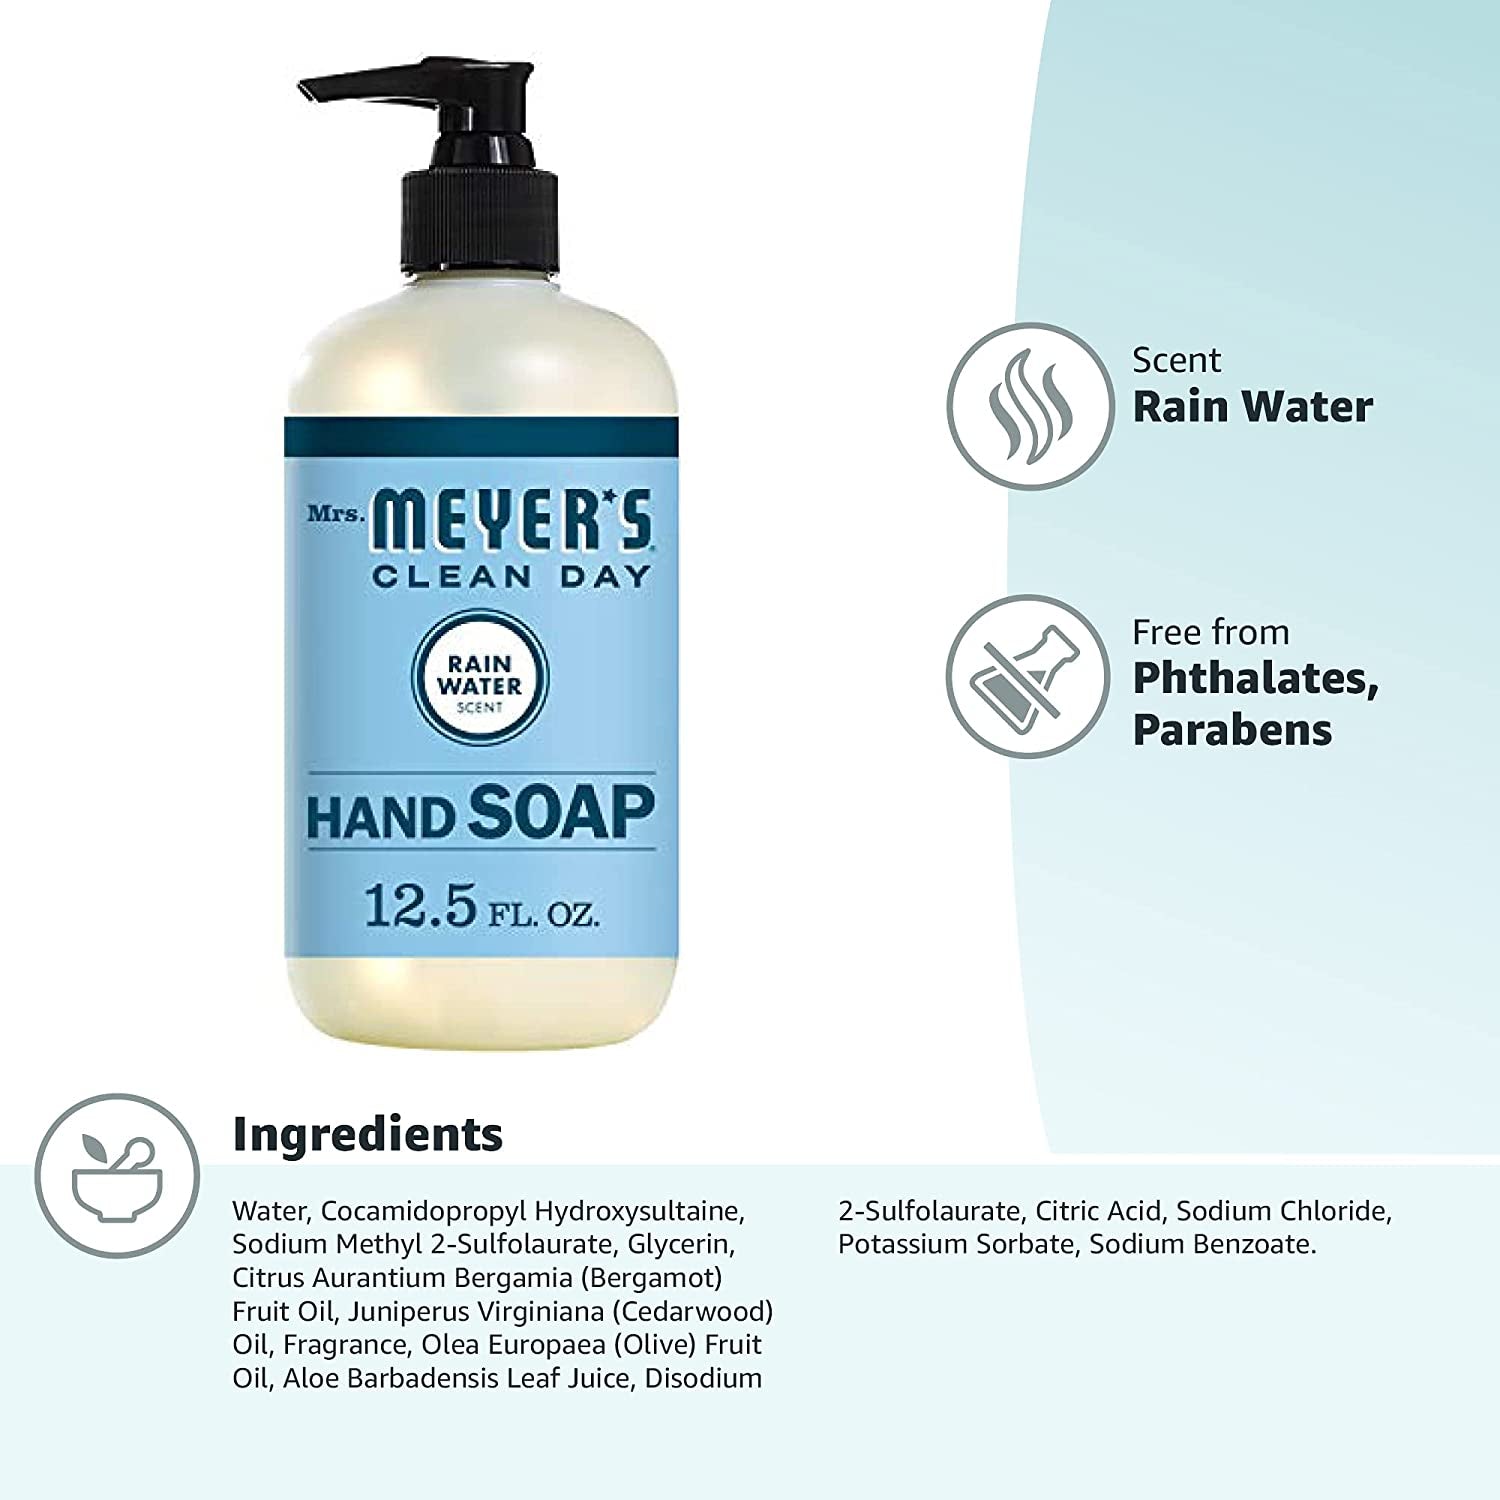 Mrs. Meyer'S Hand Soap, Made with Essential Oils, Biodegradable Formula, Rain Water, 12.5 Fl. Oz